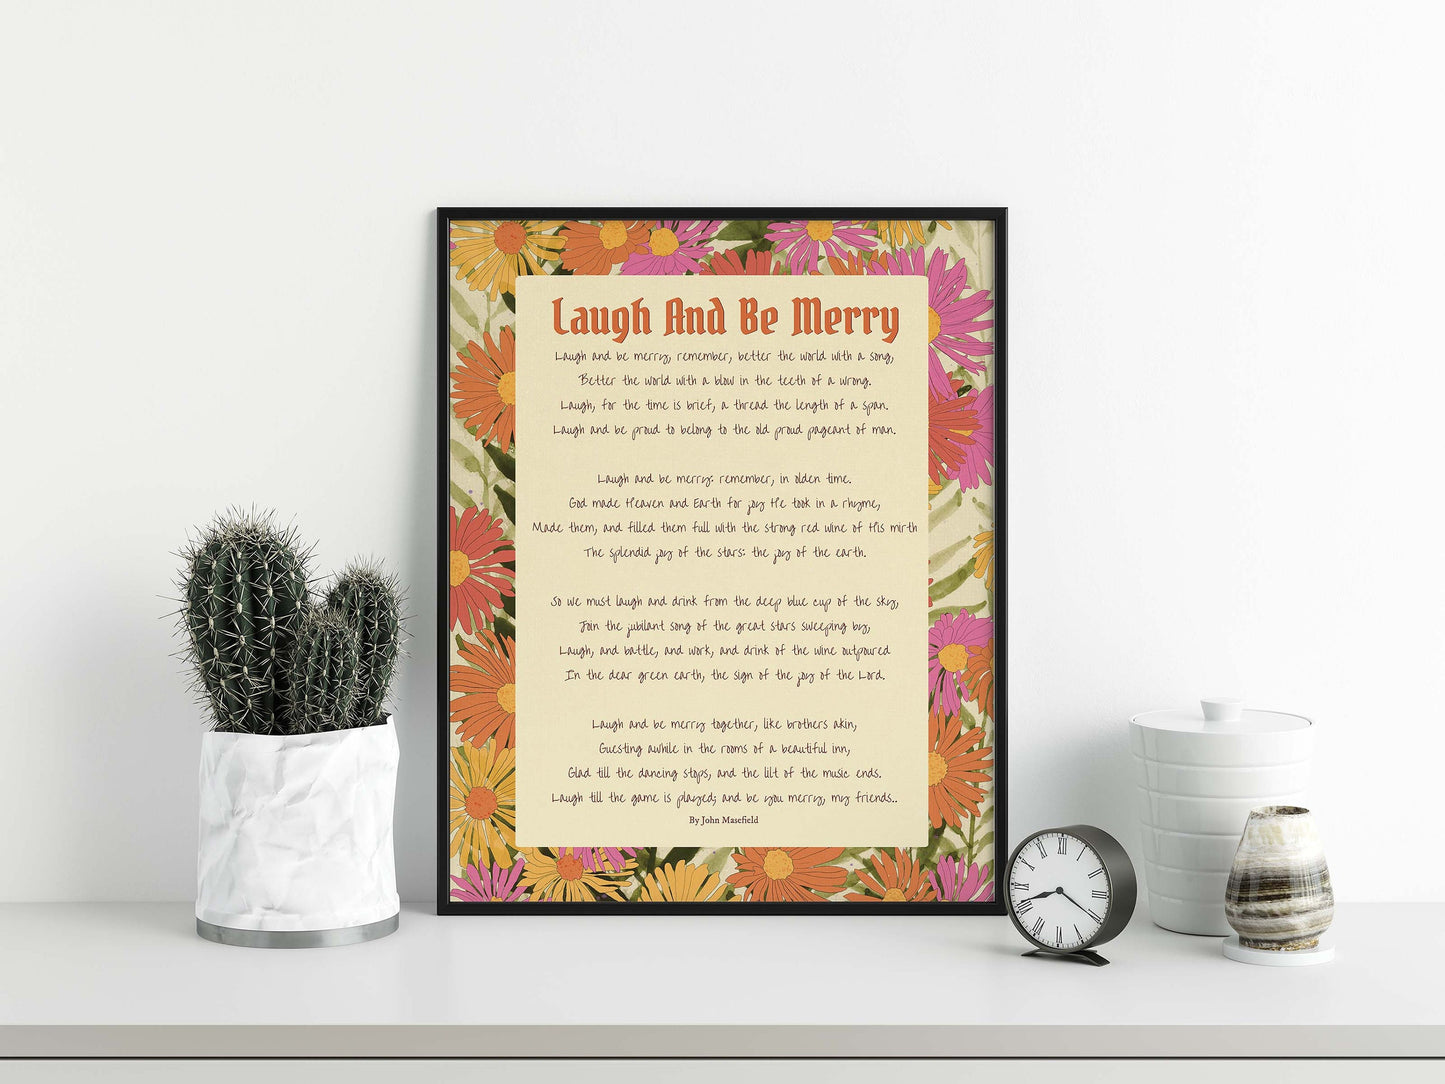 Laugh & Be Merry poem by John Masefield print with floral design in pink, orange, green, beige & yellow in black frame mockup